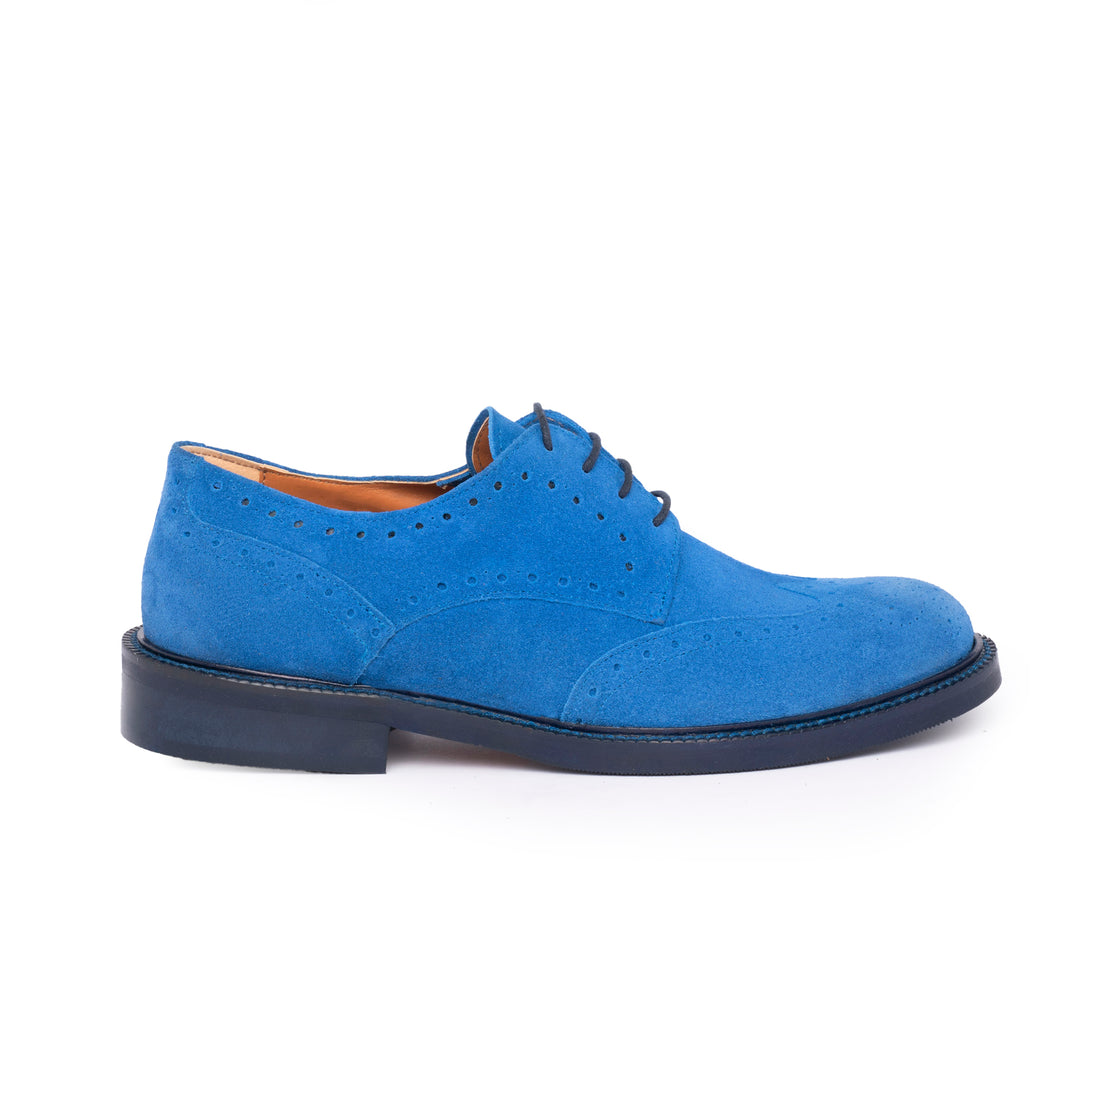 Oxford shoes in Cobalt Suede